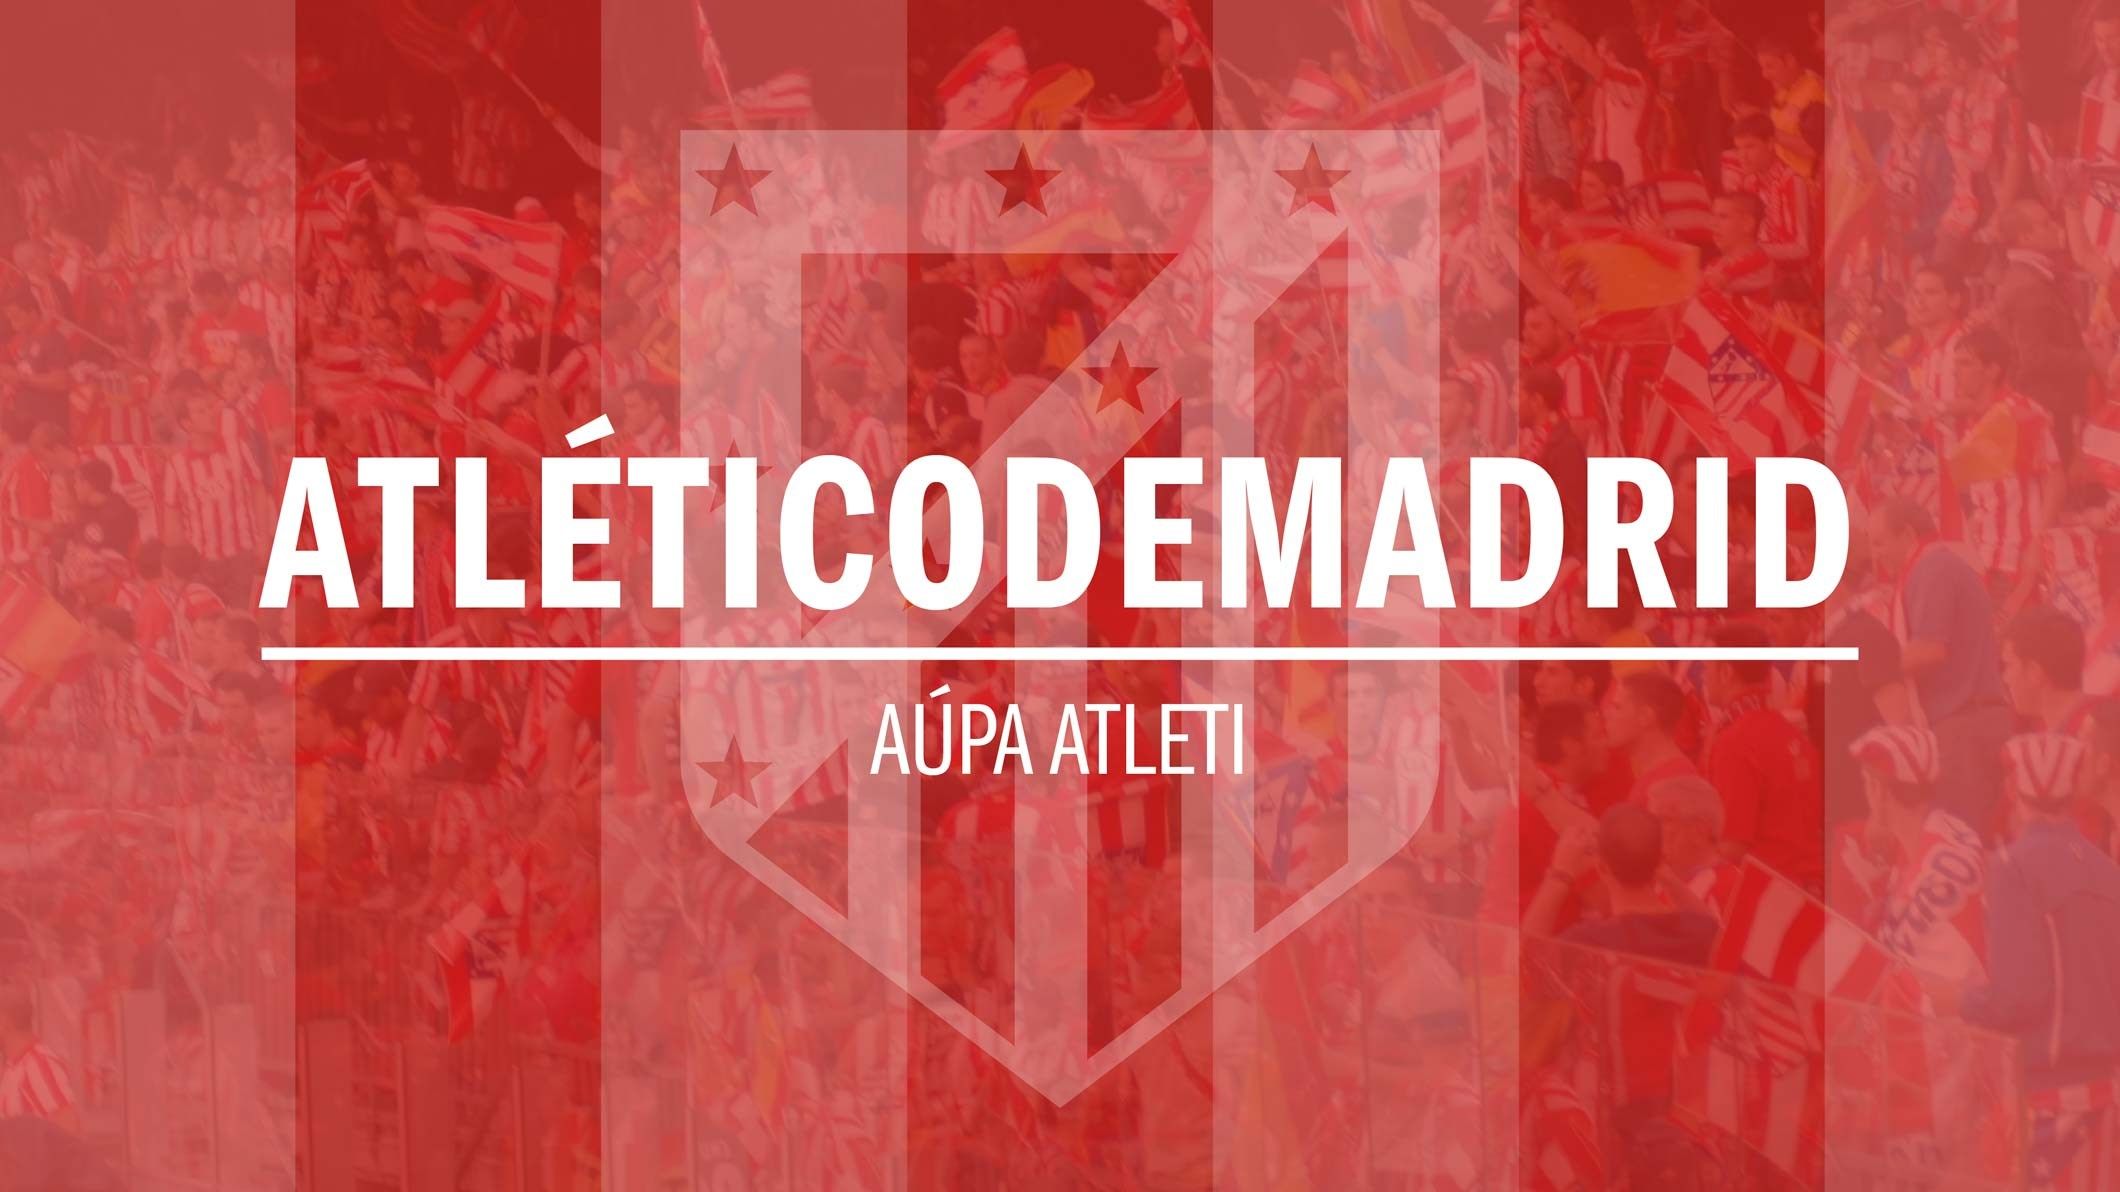 atletico madrid wallpaper hd,red,text,font,maroon,graphic design